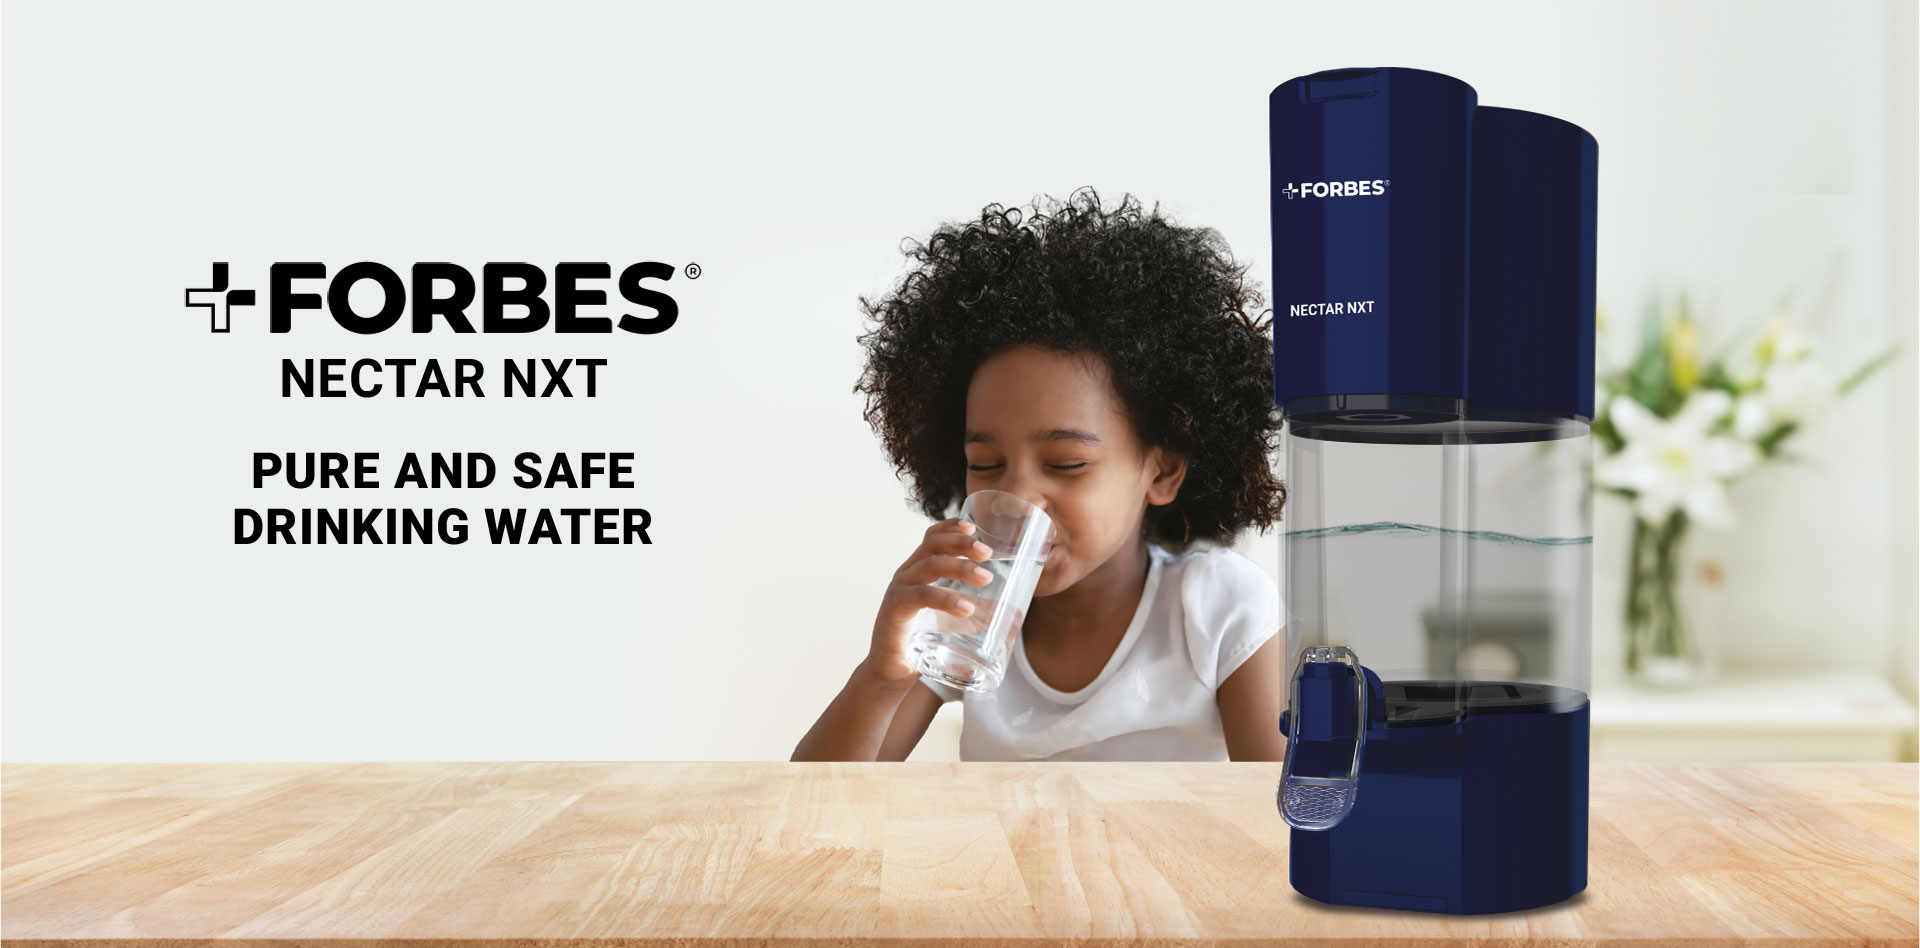 FORBES NECTAR NXT PURE & SAFE DRINKING WATER